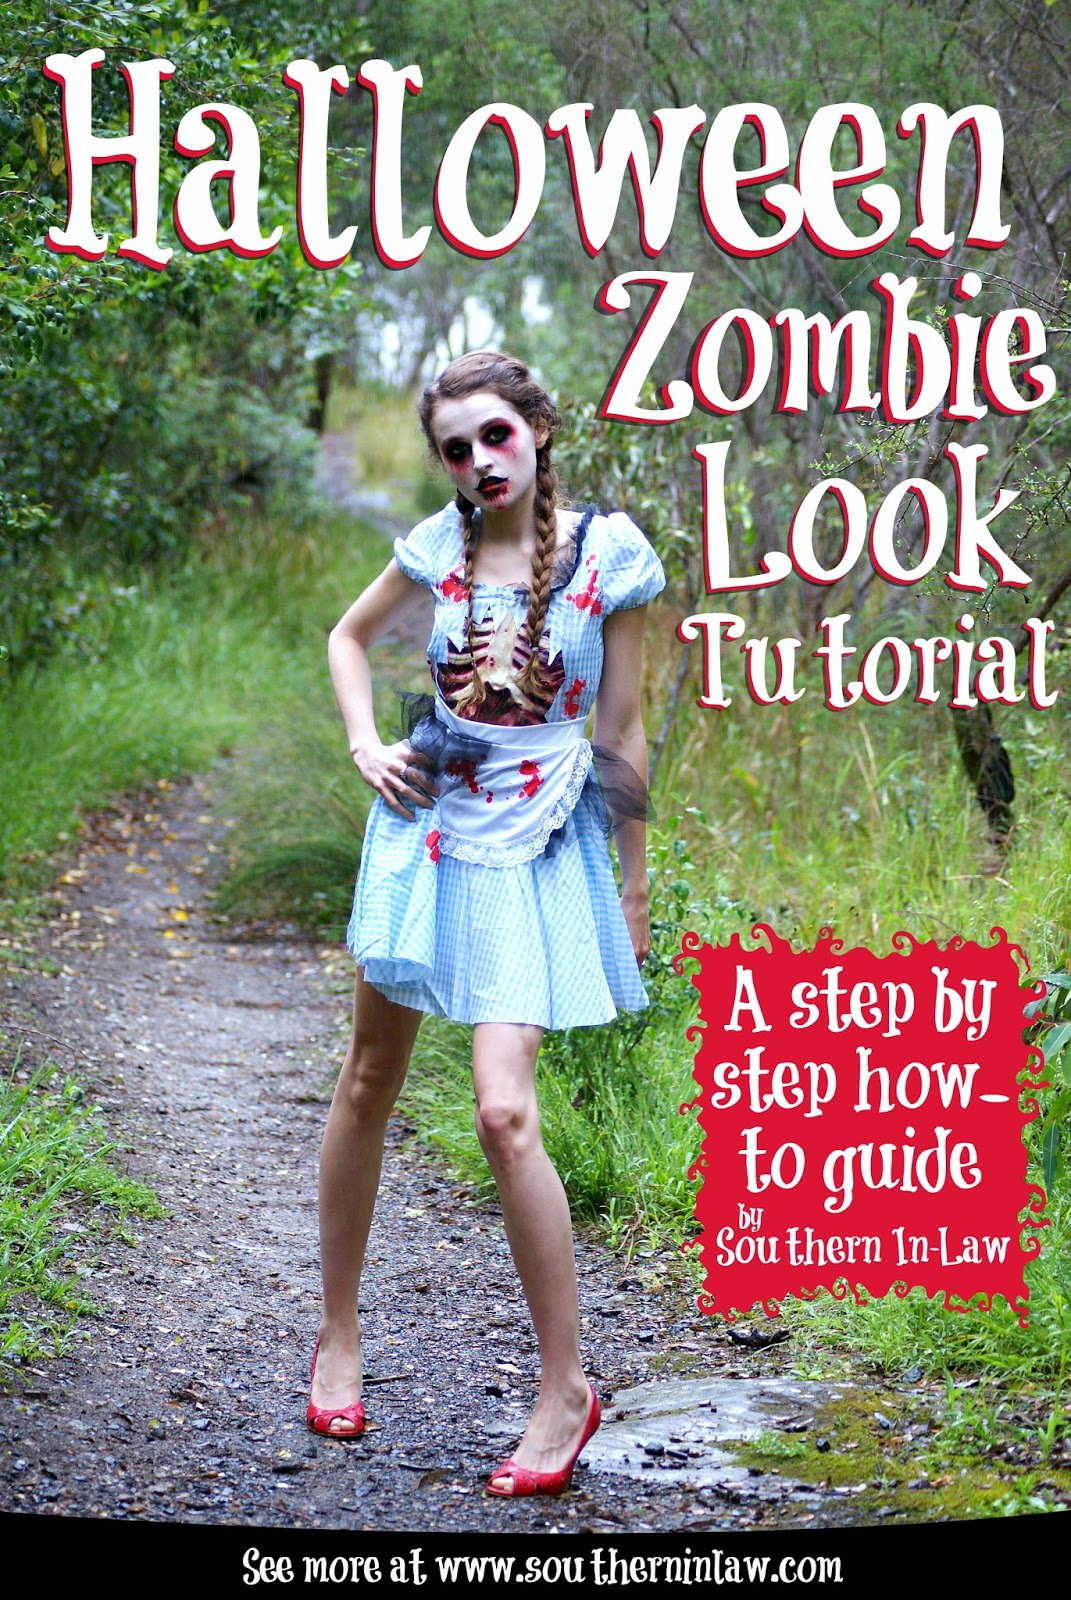 How to do Zombie Make-up — Quick, Step-By-Step Face Painting